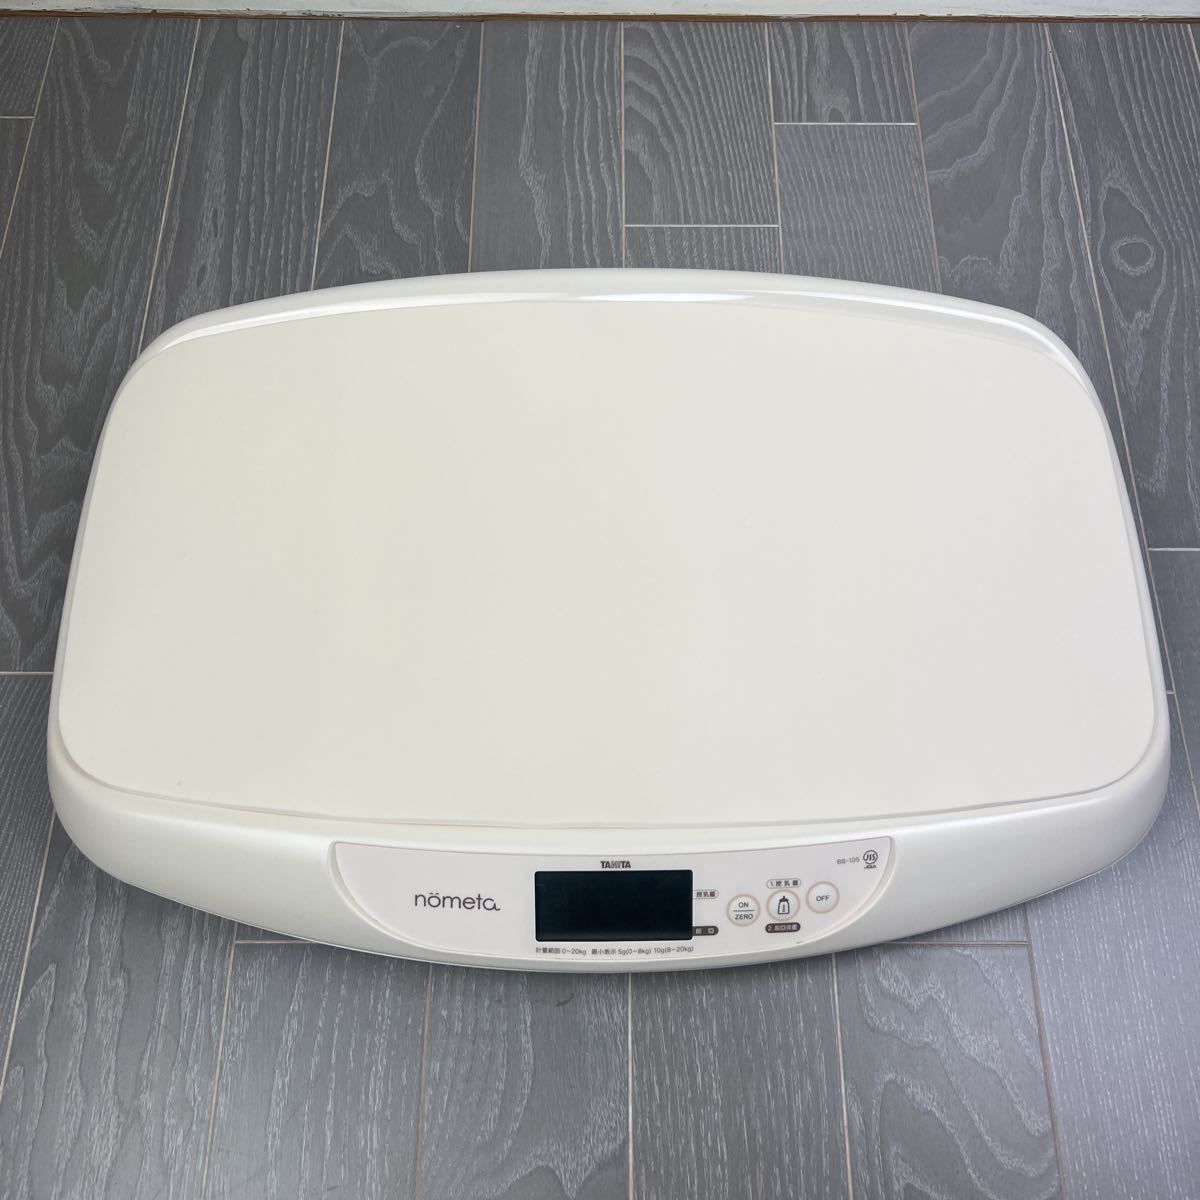 [ secondhand goods ]18 year made TANITA nometa BB-105 baby scale baby scales newborn baby electrification verification settled present condition goods 